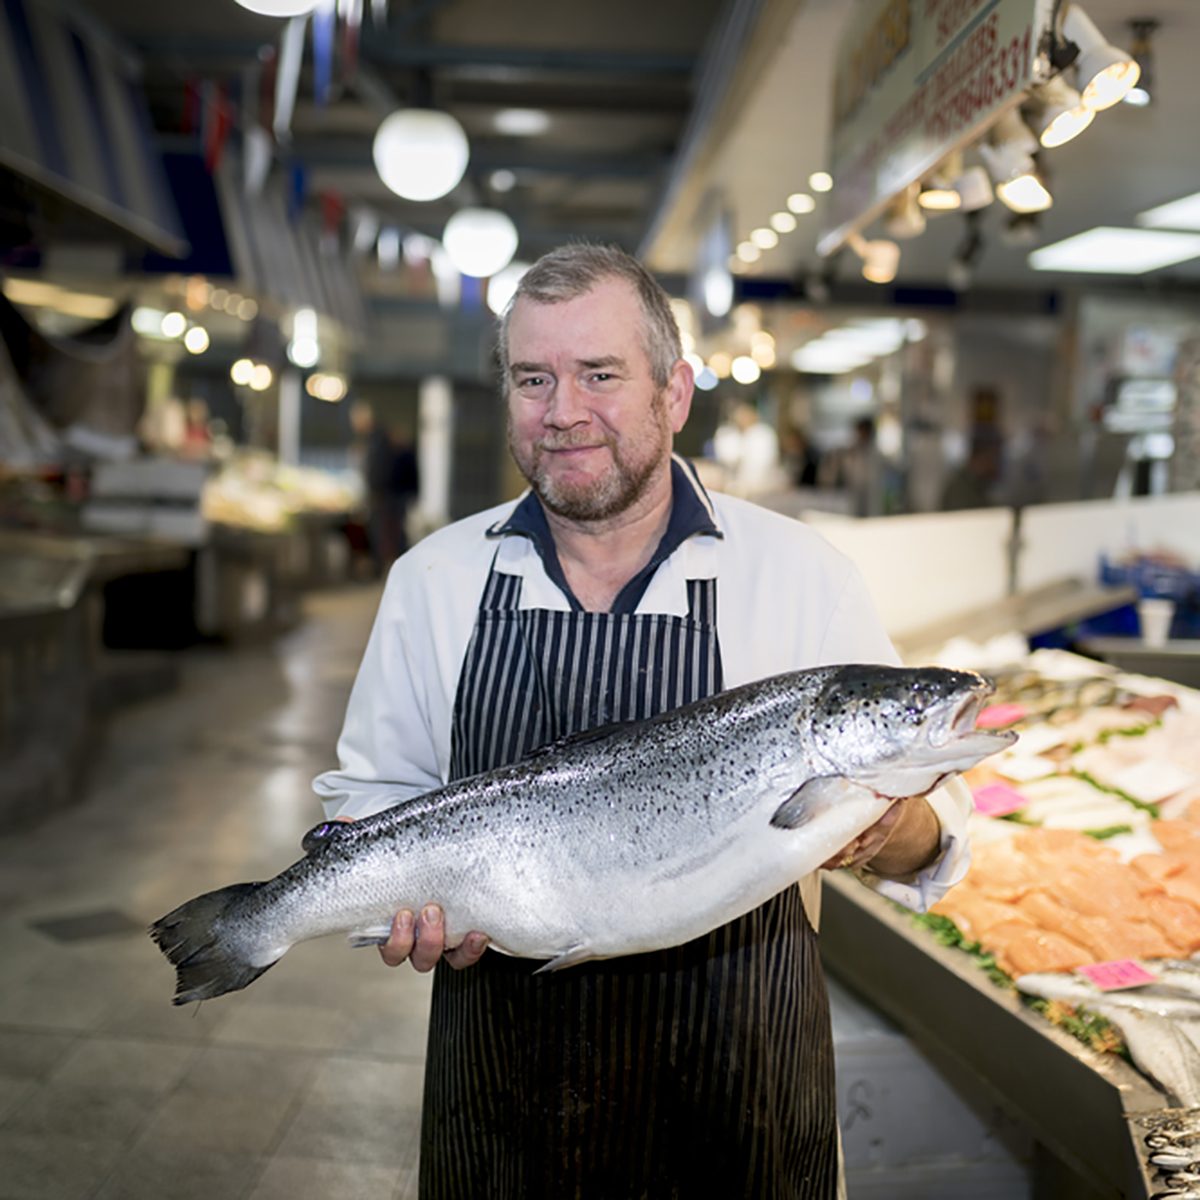 Male fishmonger wearing an apron holding large and whole salmon fish in front of display counter early in the morning on a market in England.